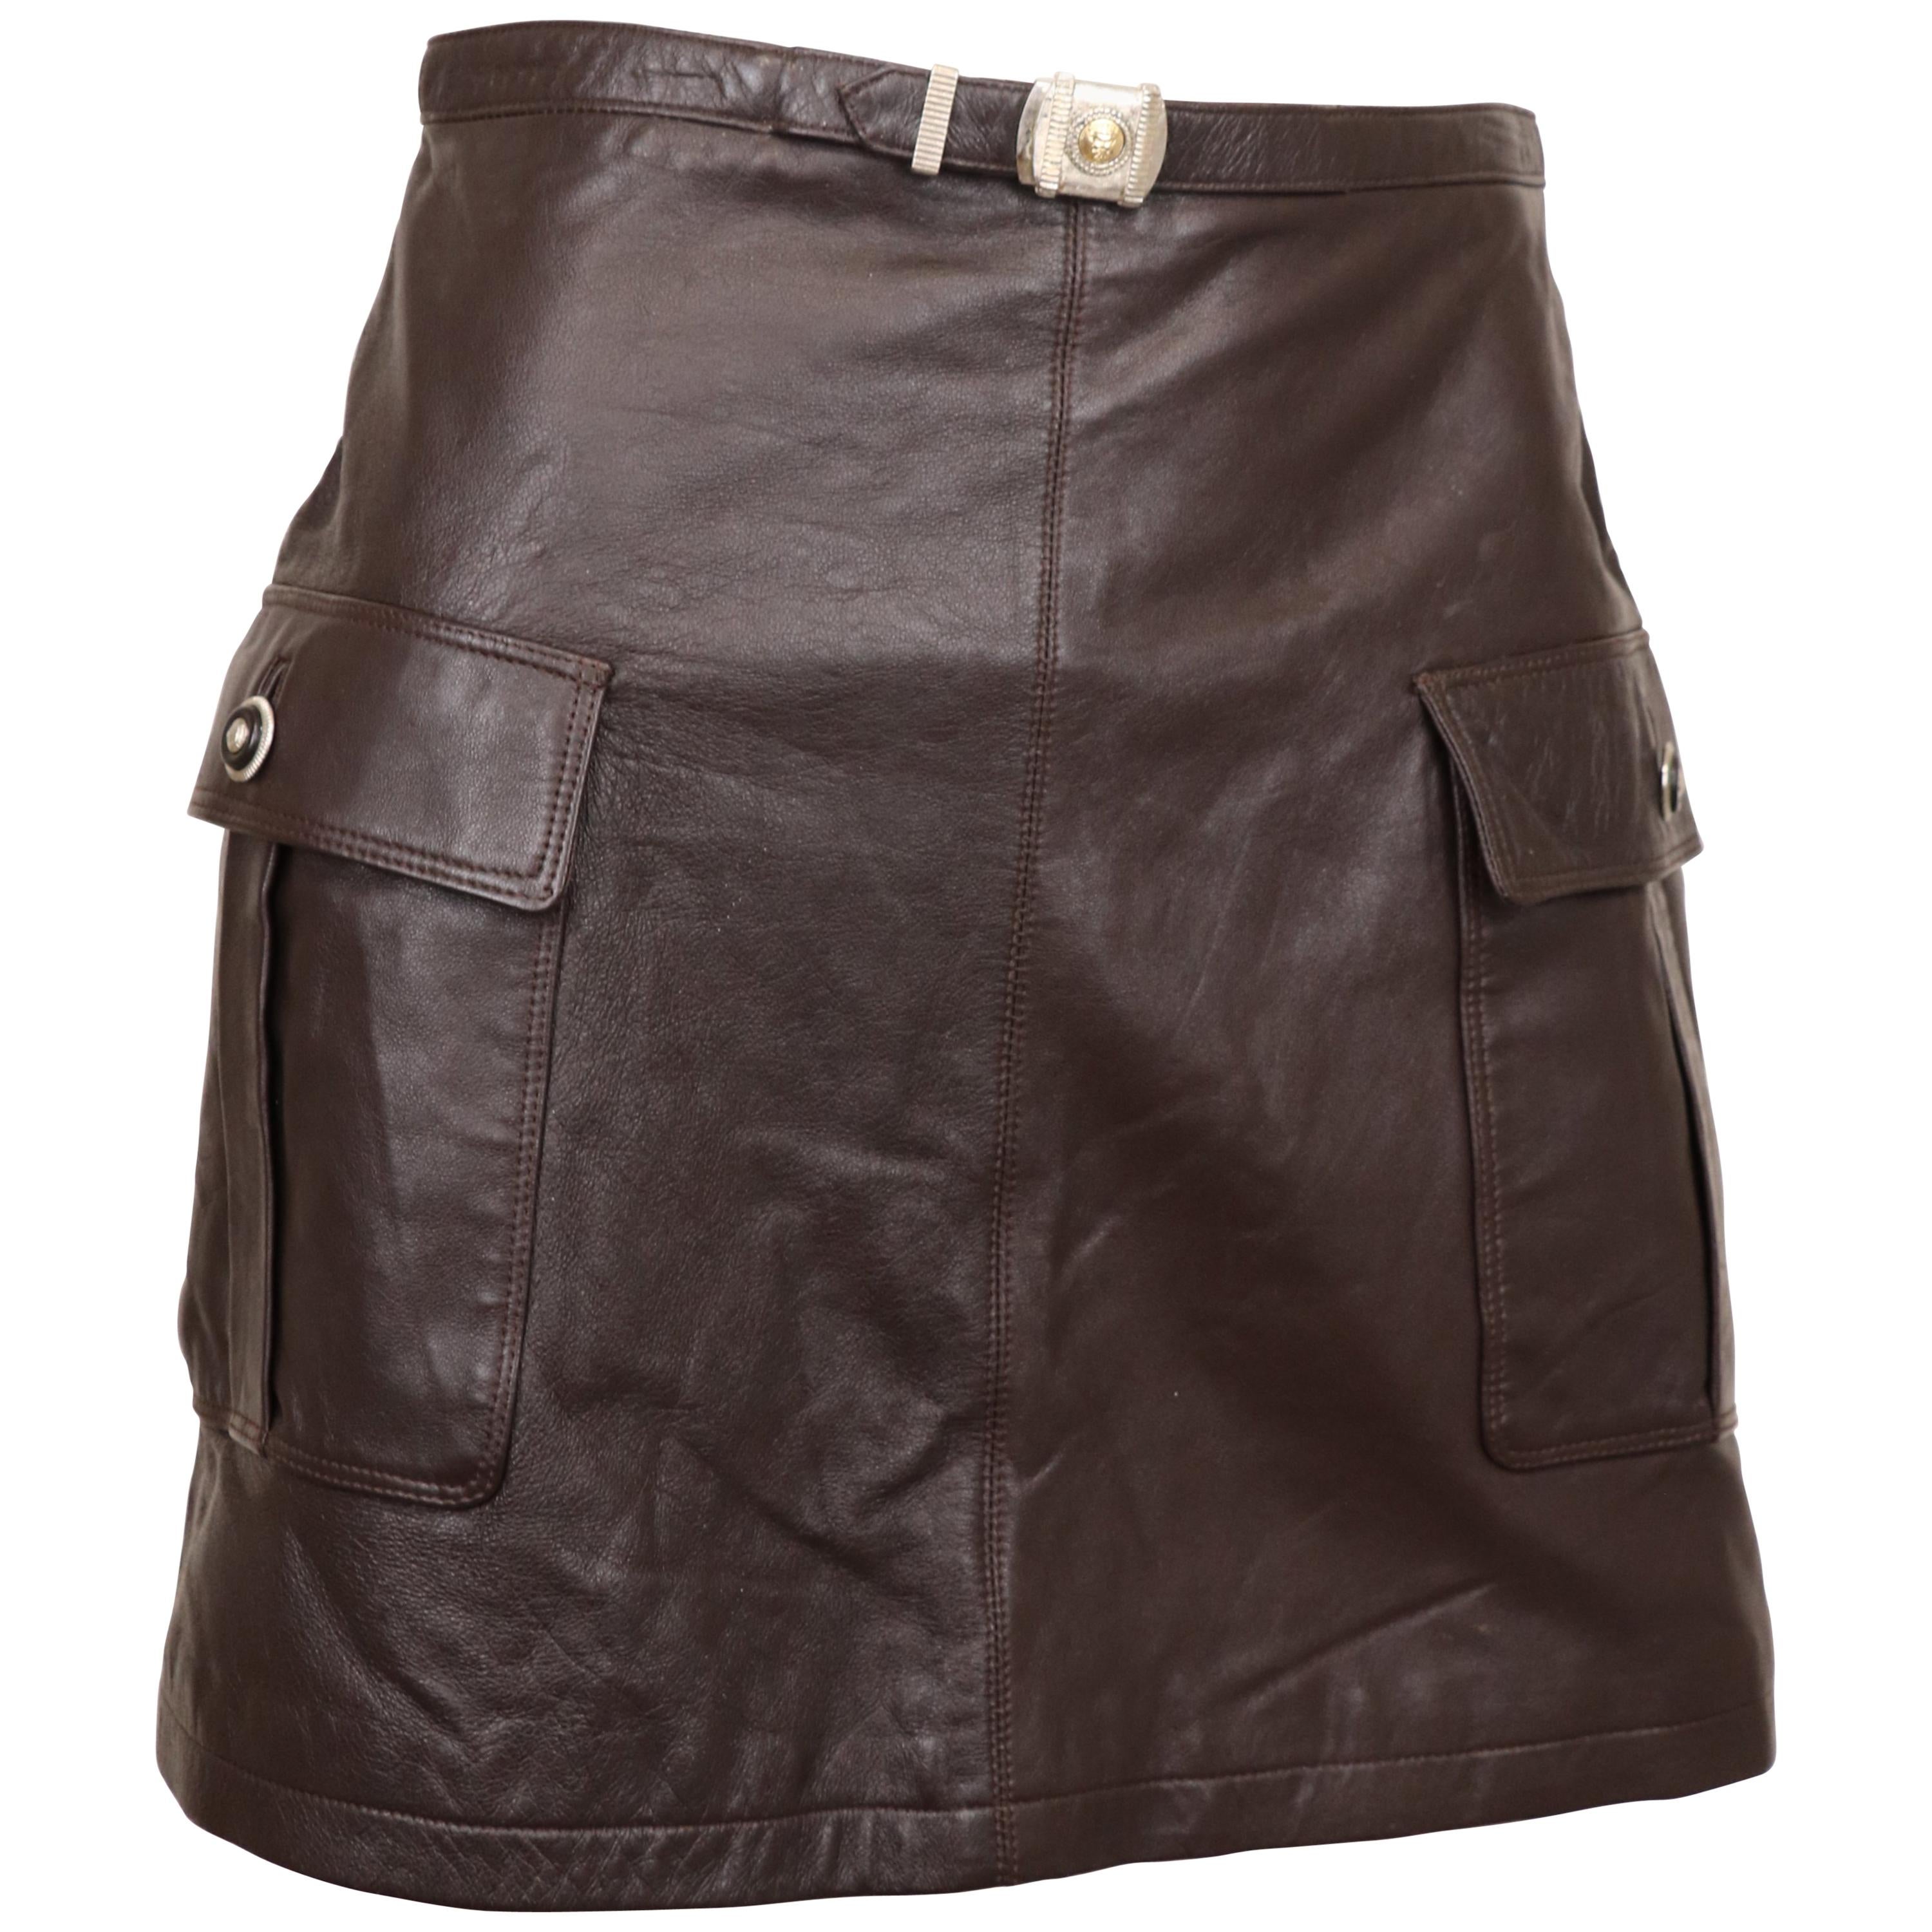 Istante by Versace Zeus Buckle Brown Leather Mini Skirt